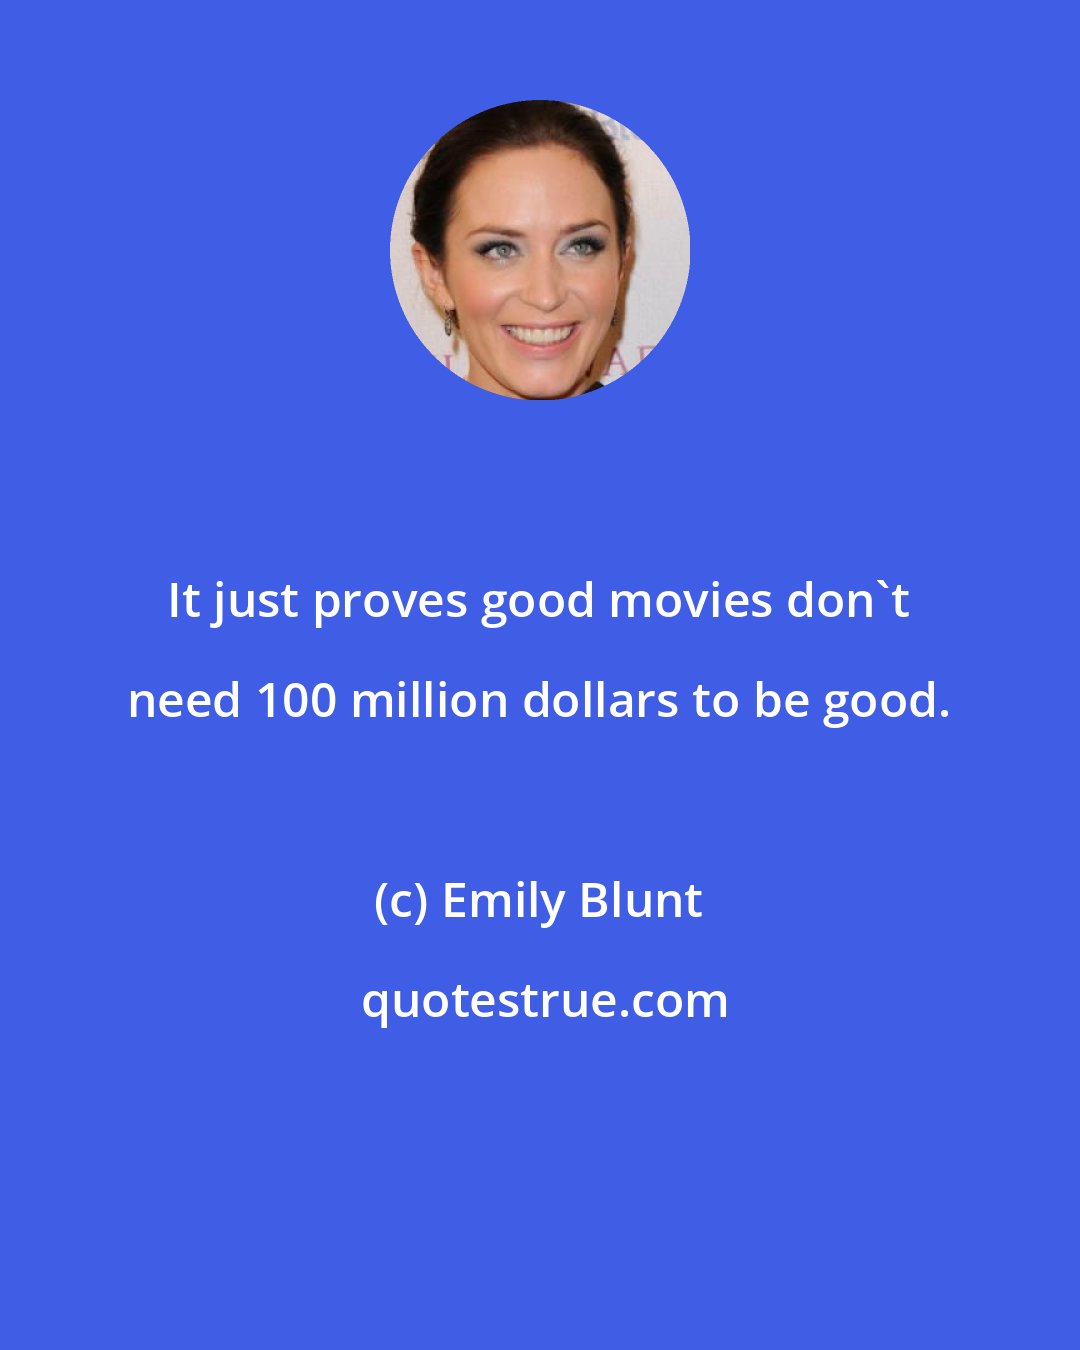 Emily Blunt: It just proves good movies don't need 100 million dollars to be good.